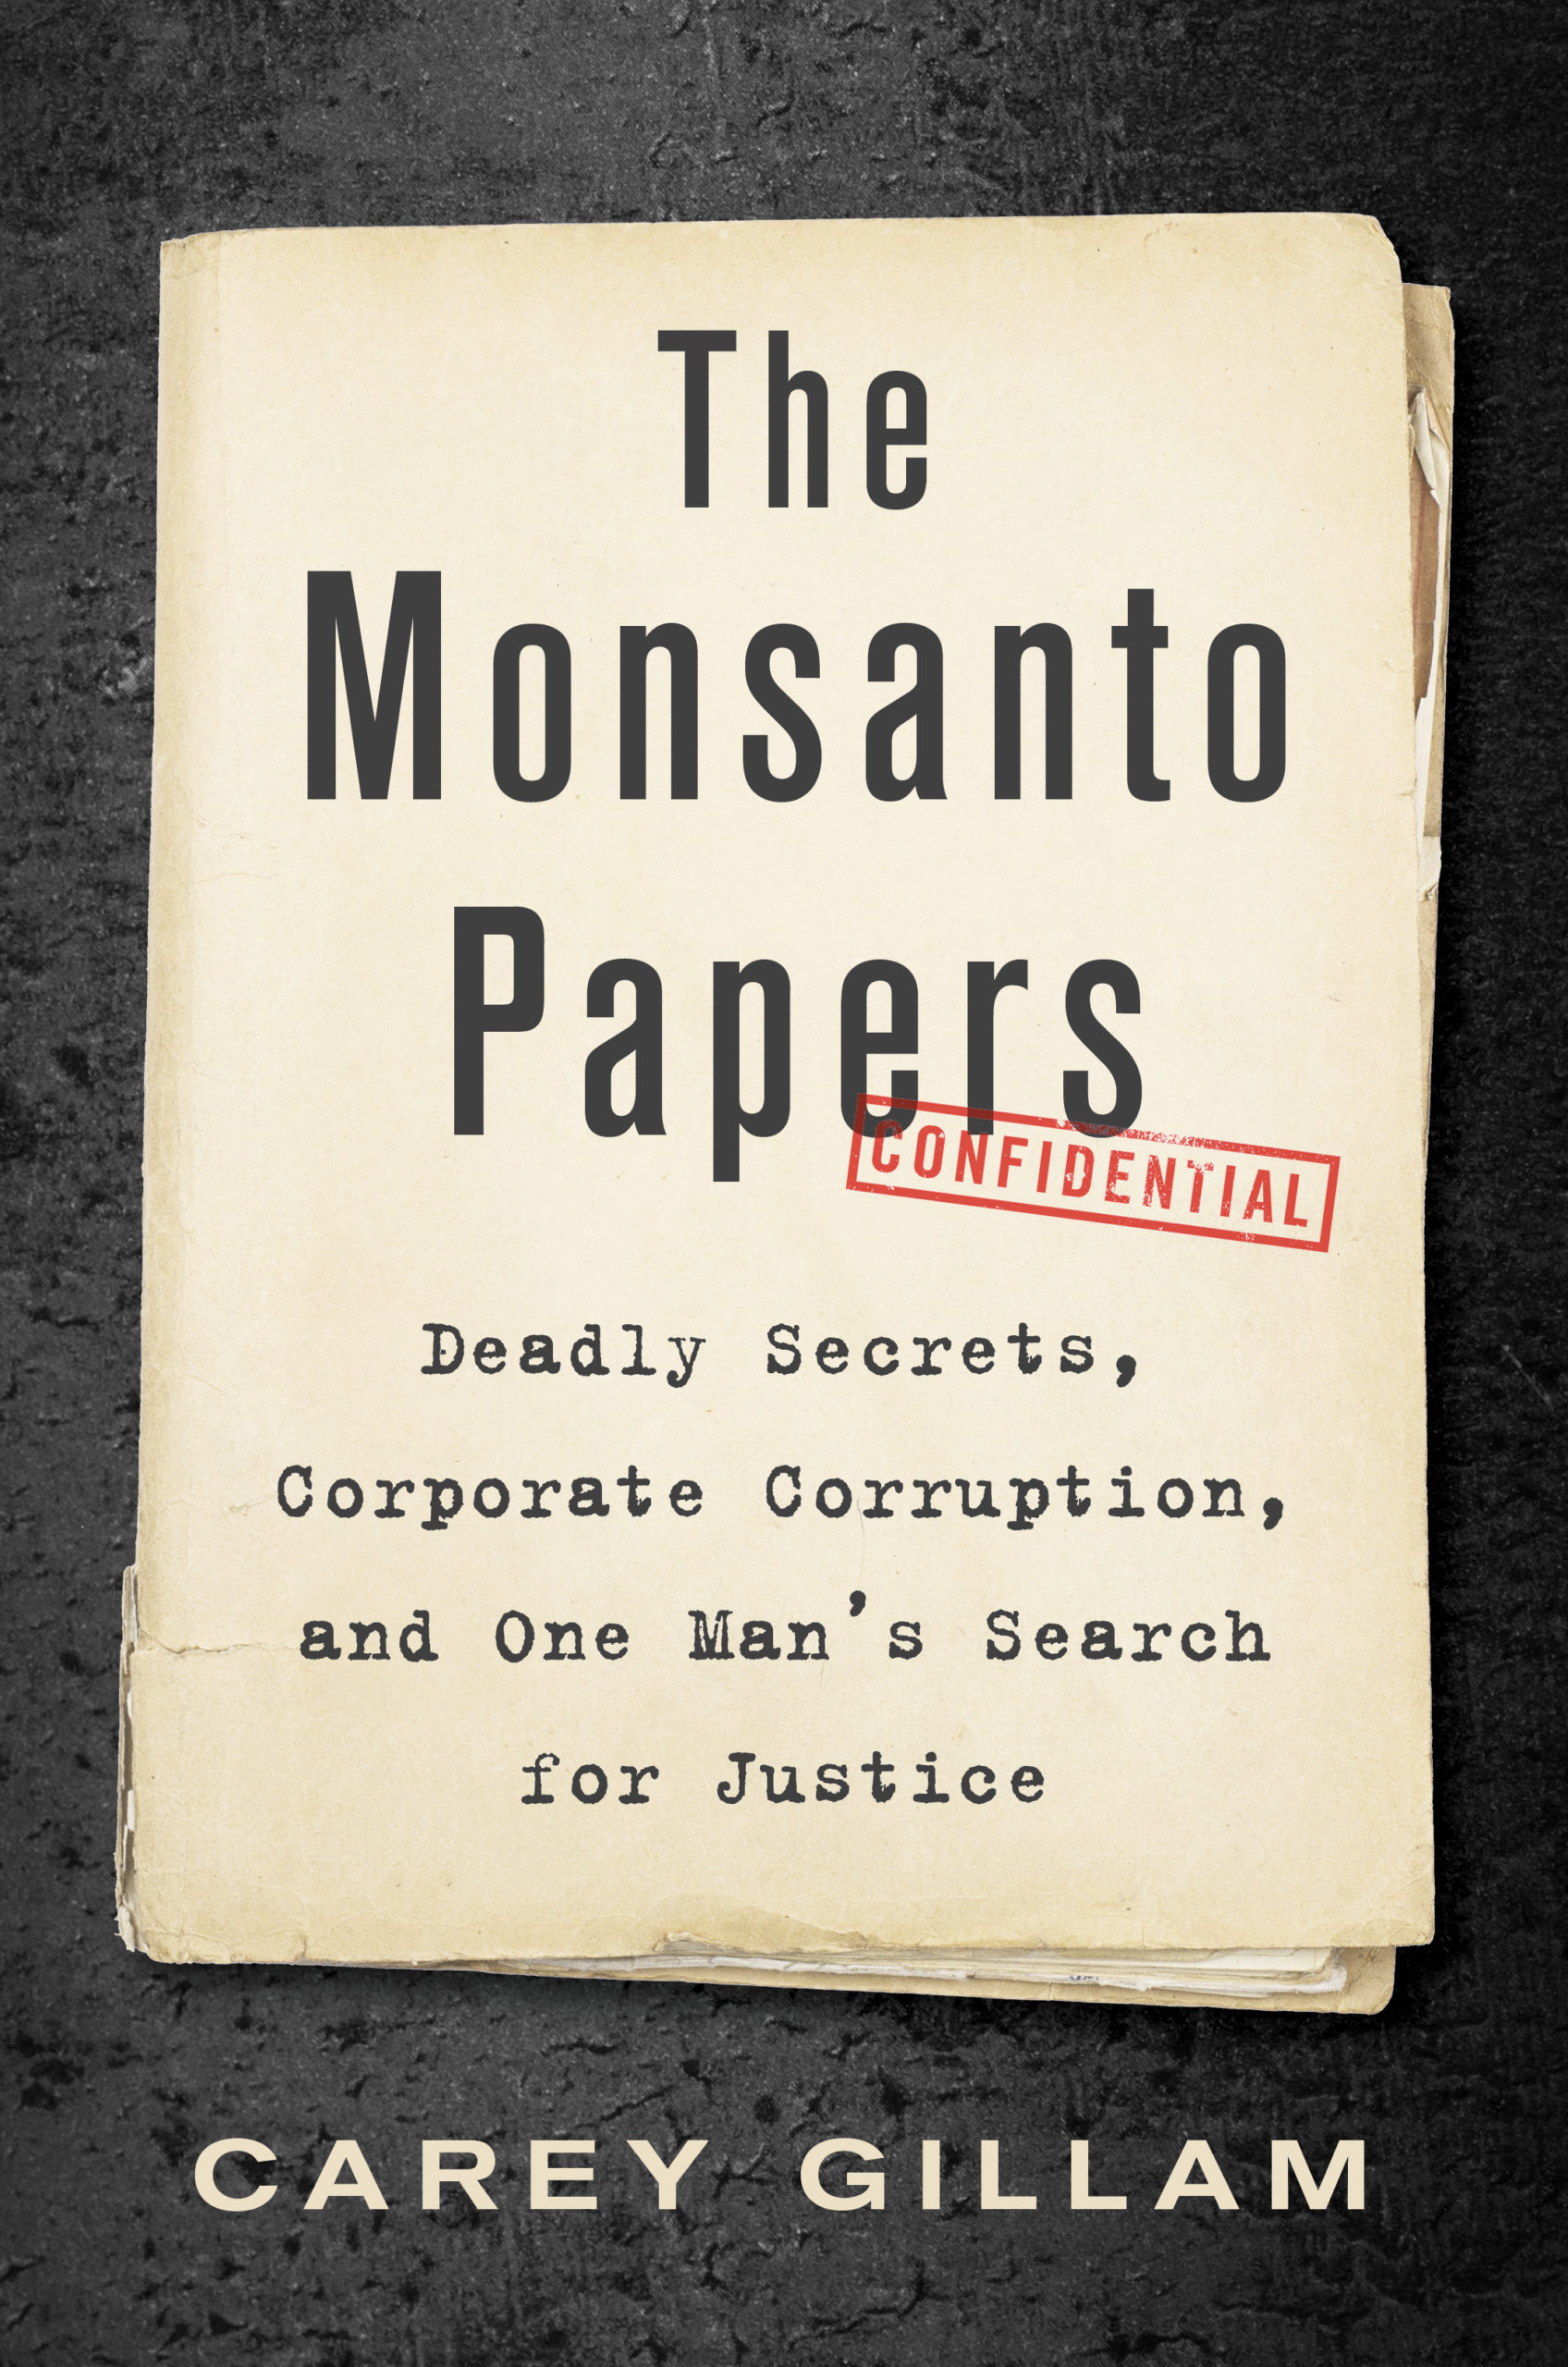 The Monsanto Papers by Carey Gillam